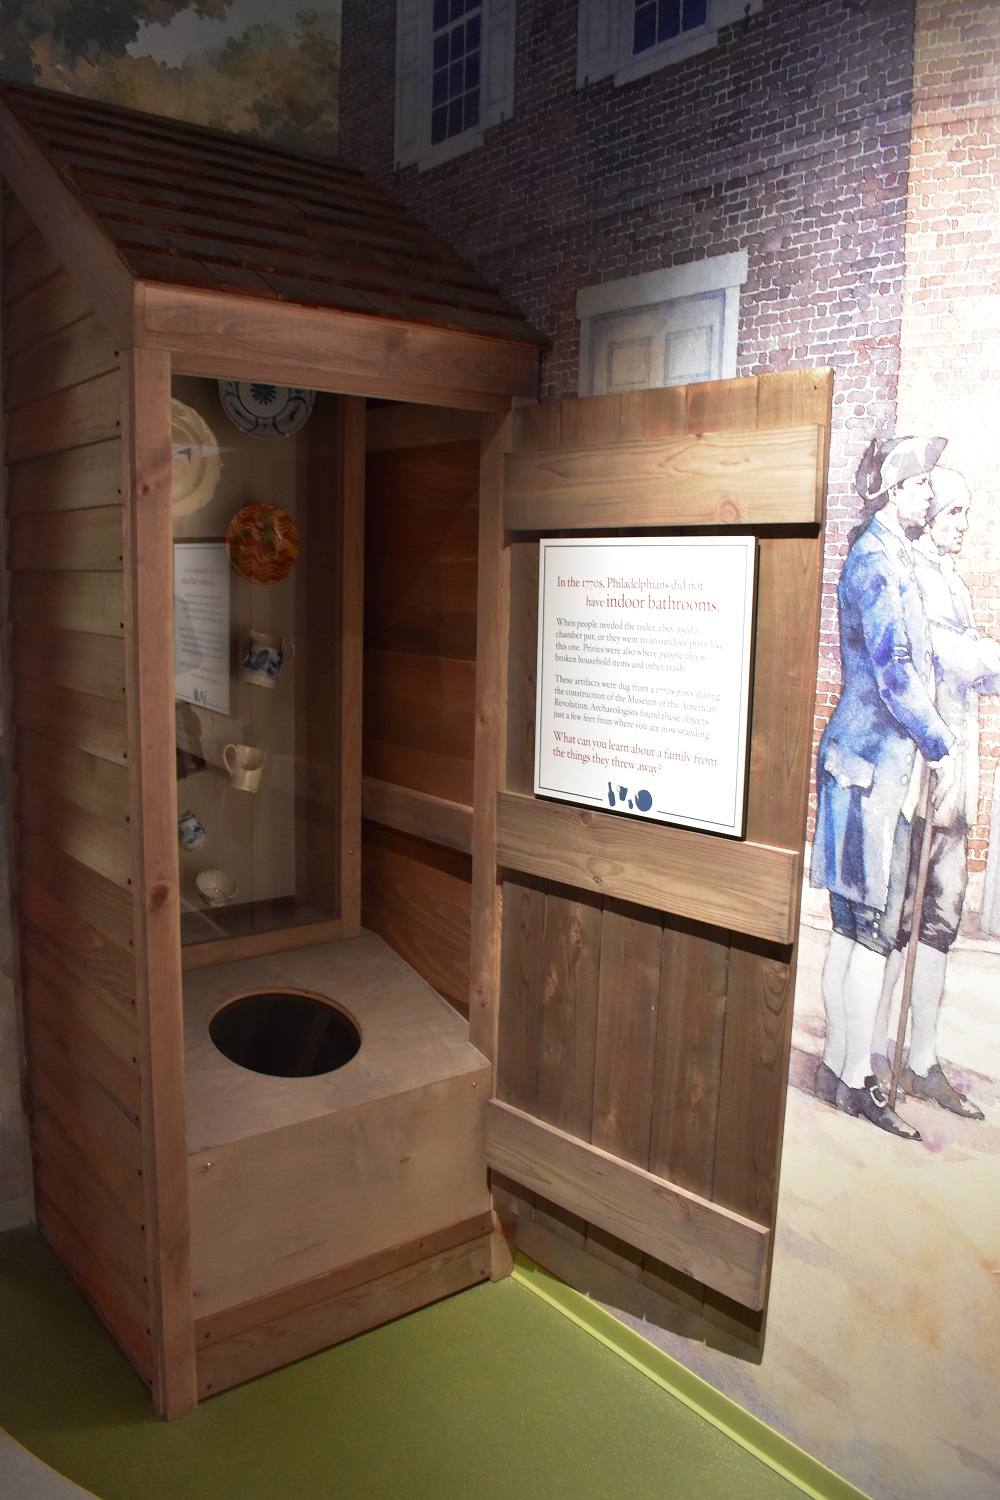 The privy will certainly be one of the most talked about exhibits at Revolution Place